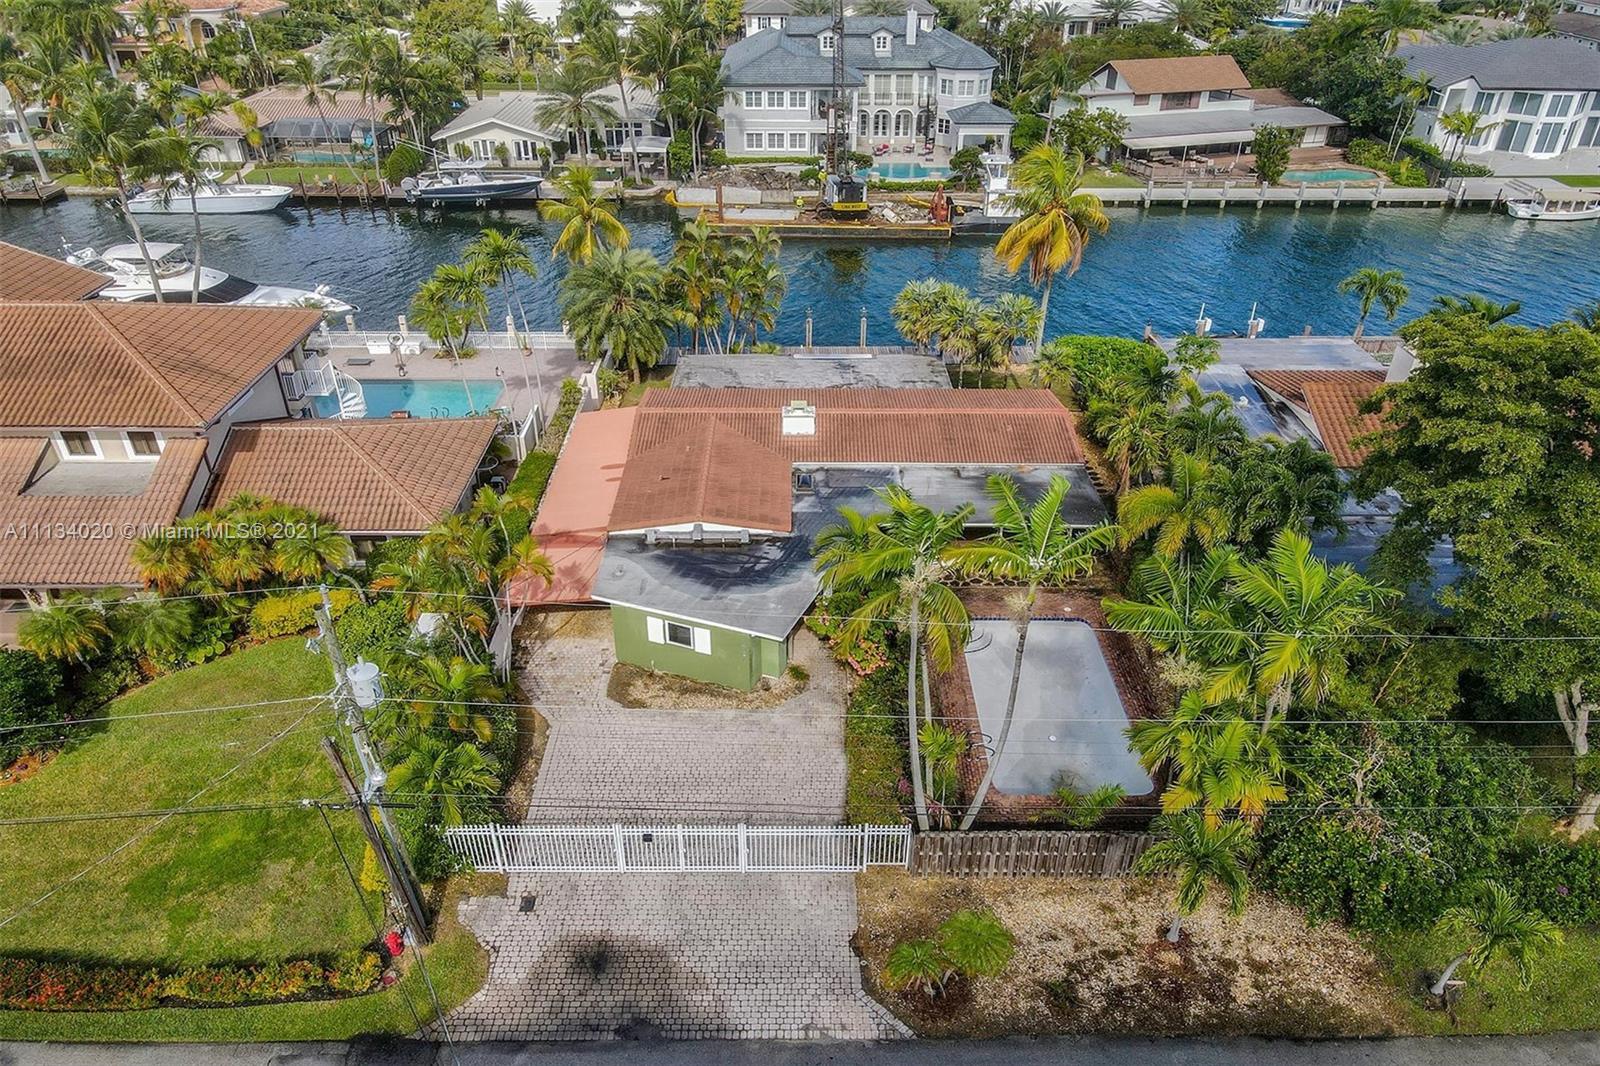 IT'S ALL ABOUT LOCATION!!! This property is located in the very desirable Rio Vista neighborhood, has amazing views, wide canal with direct ocean access, 75 ft dock. You can renovate this property or build your dream home...Centrally located, close to shops, restaurants, international airport, etc.